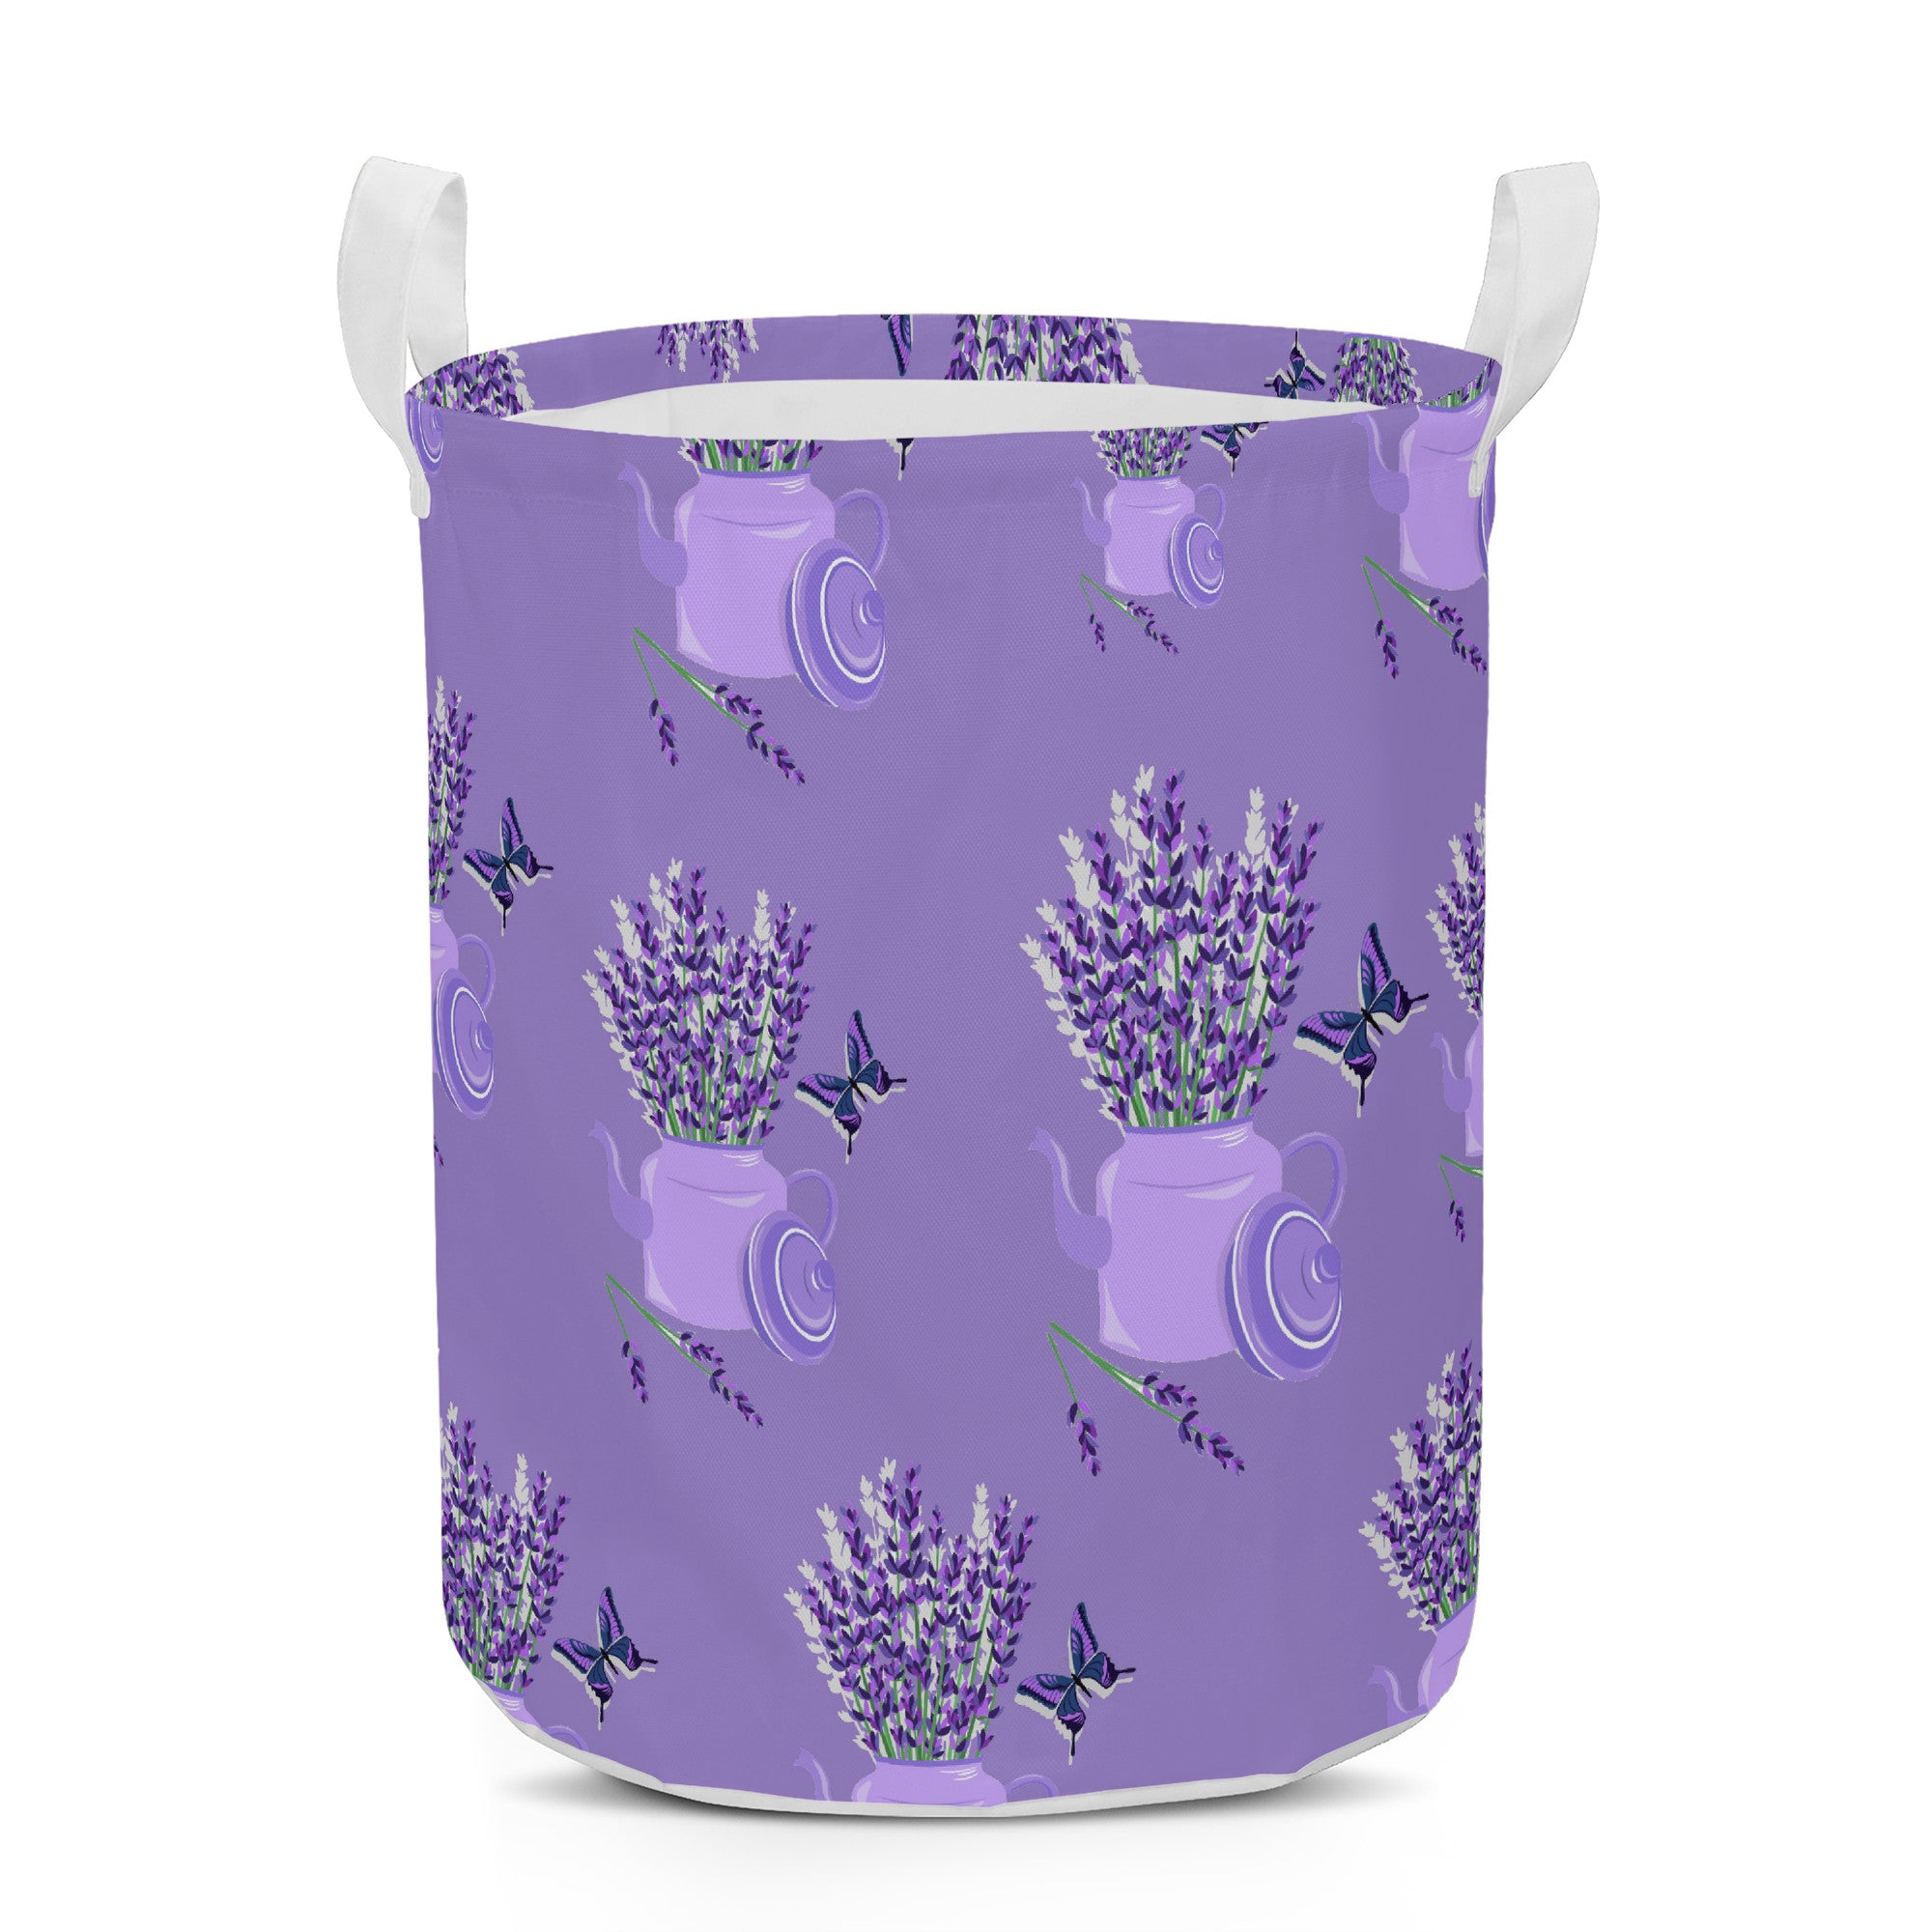 Round Laundry Basket Lavender decoration Home-clothes-jewelry